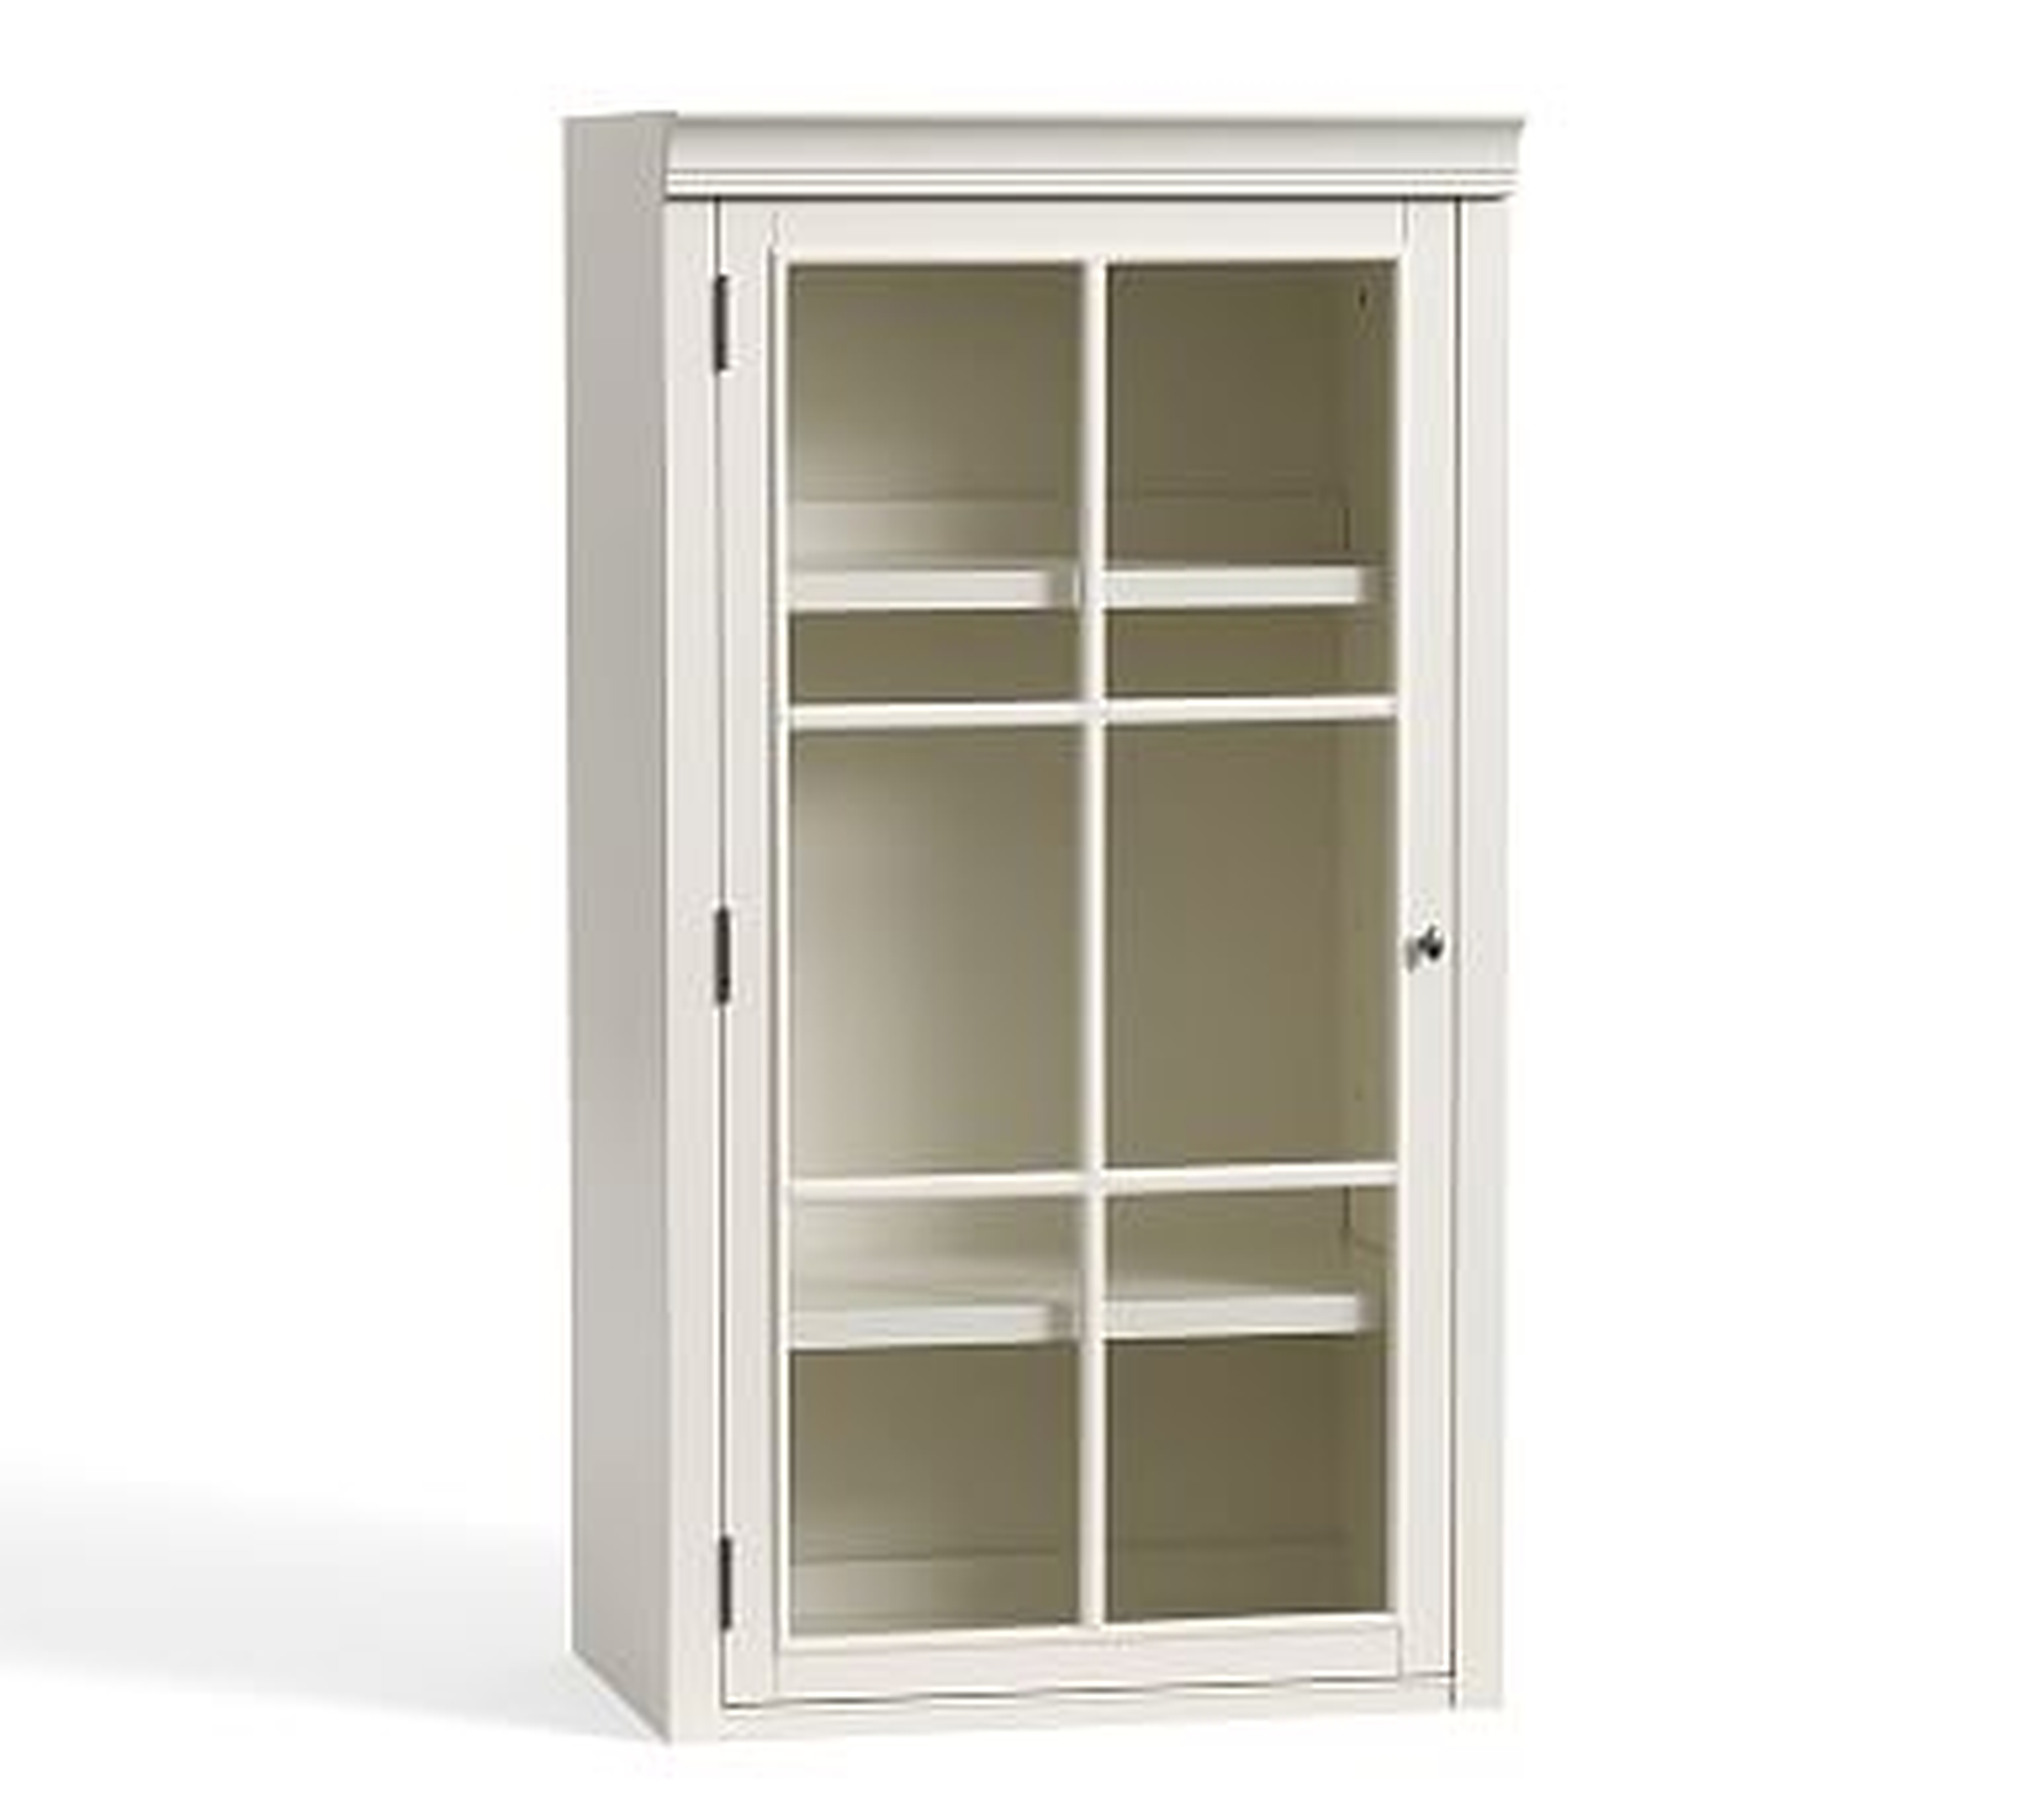 Logan Hutch With Glass Doors, Alabaster, 24" Wide - Pottery Barn